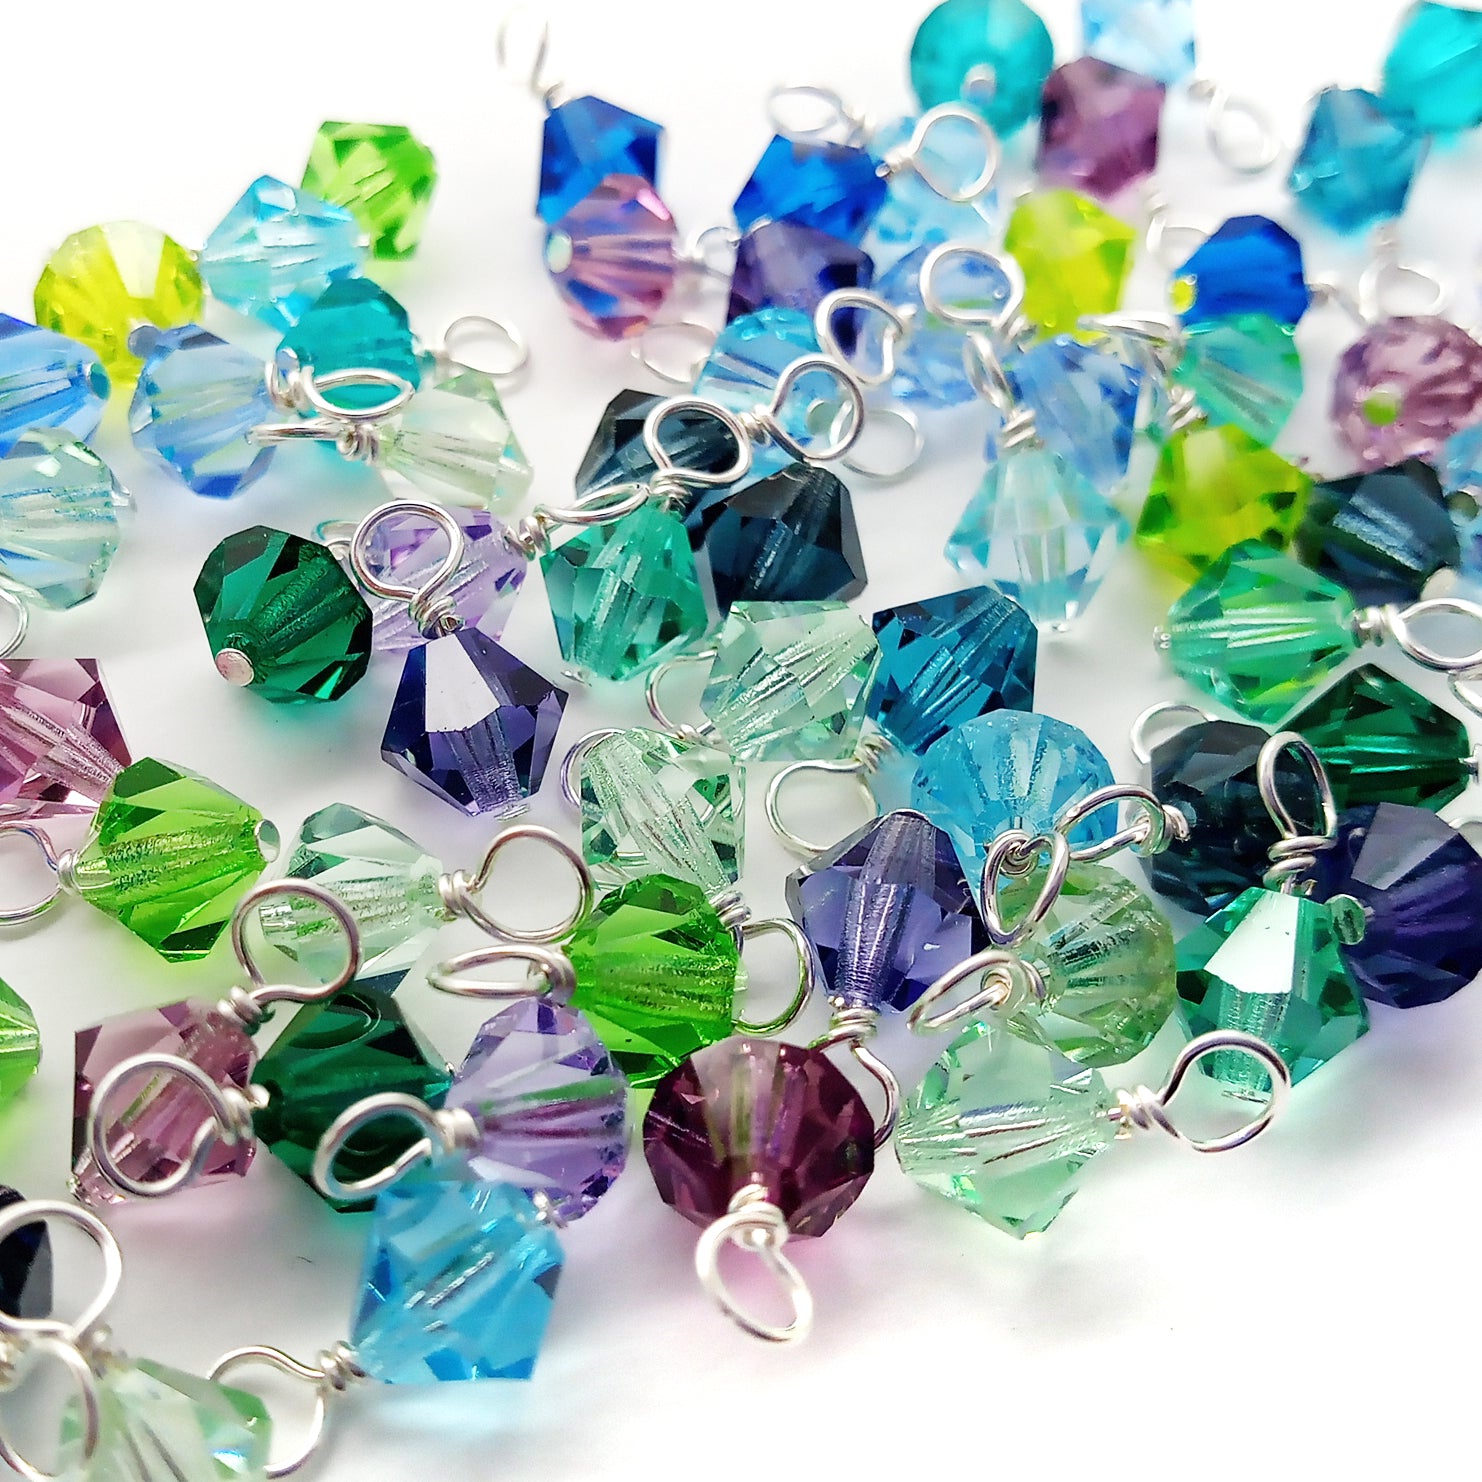 6mm bicone bead dangle charms in Czech glass. Mix of blues, aquas, turquoise, greens, and purples.